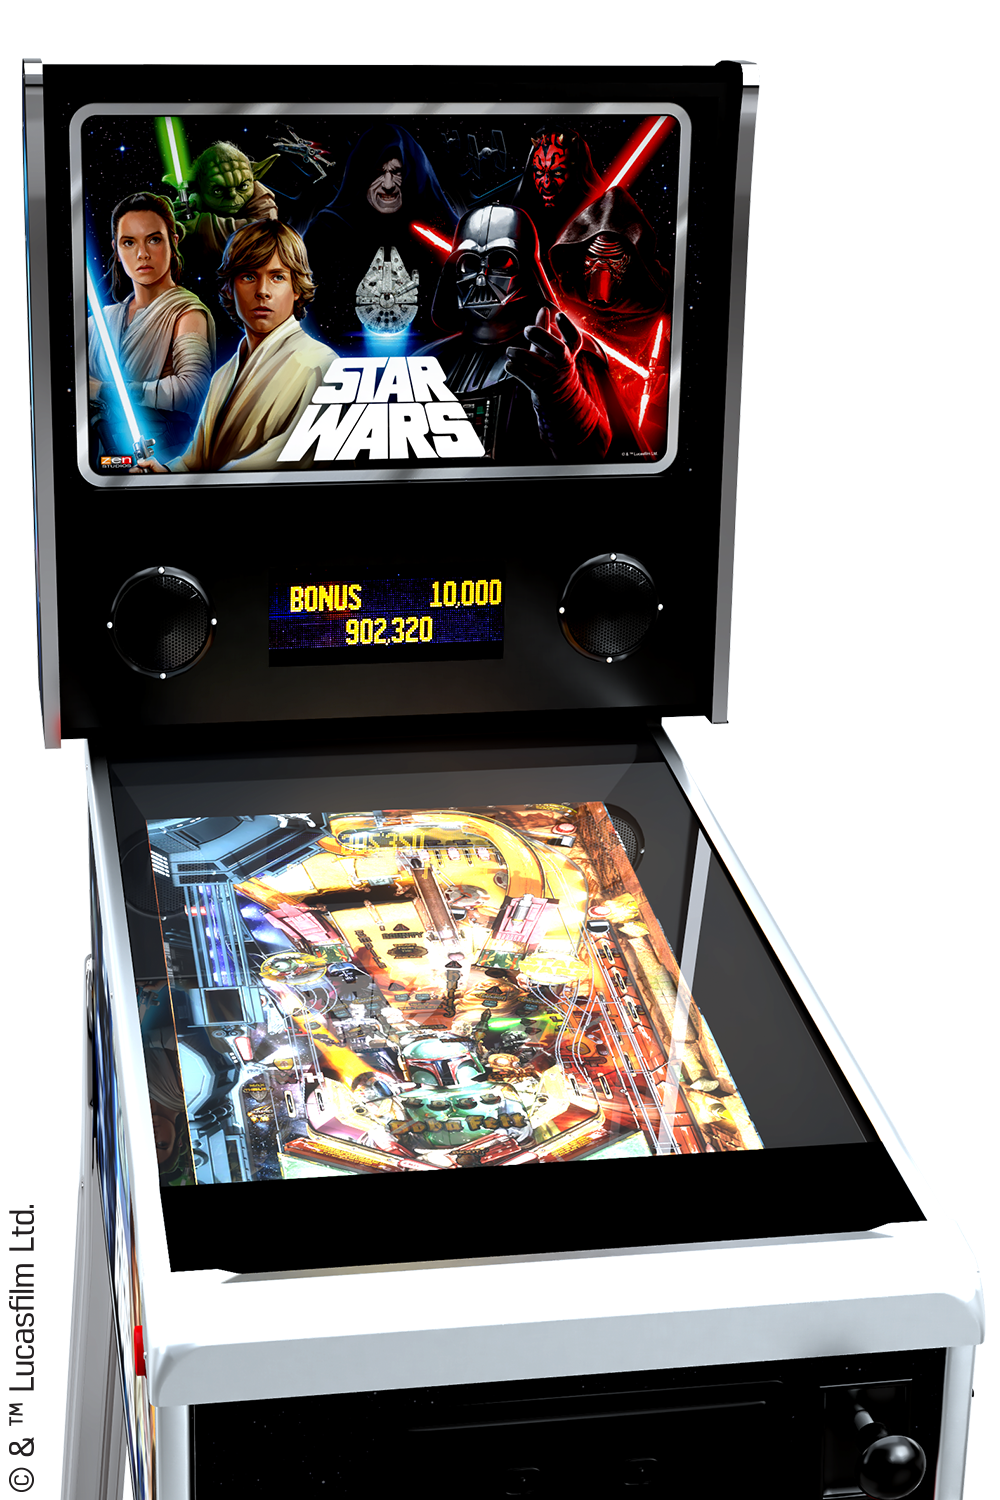 Pinball Star download the last version for apple